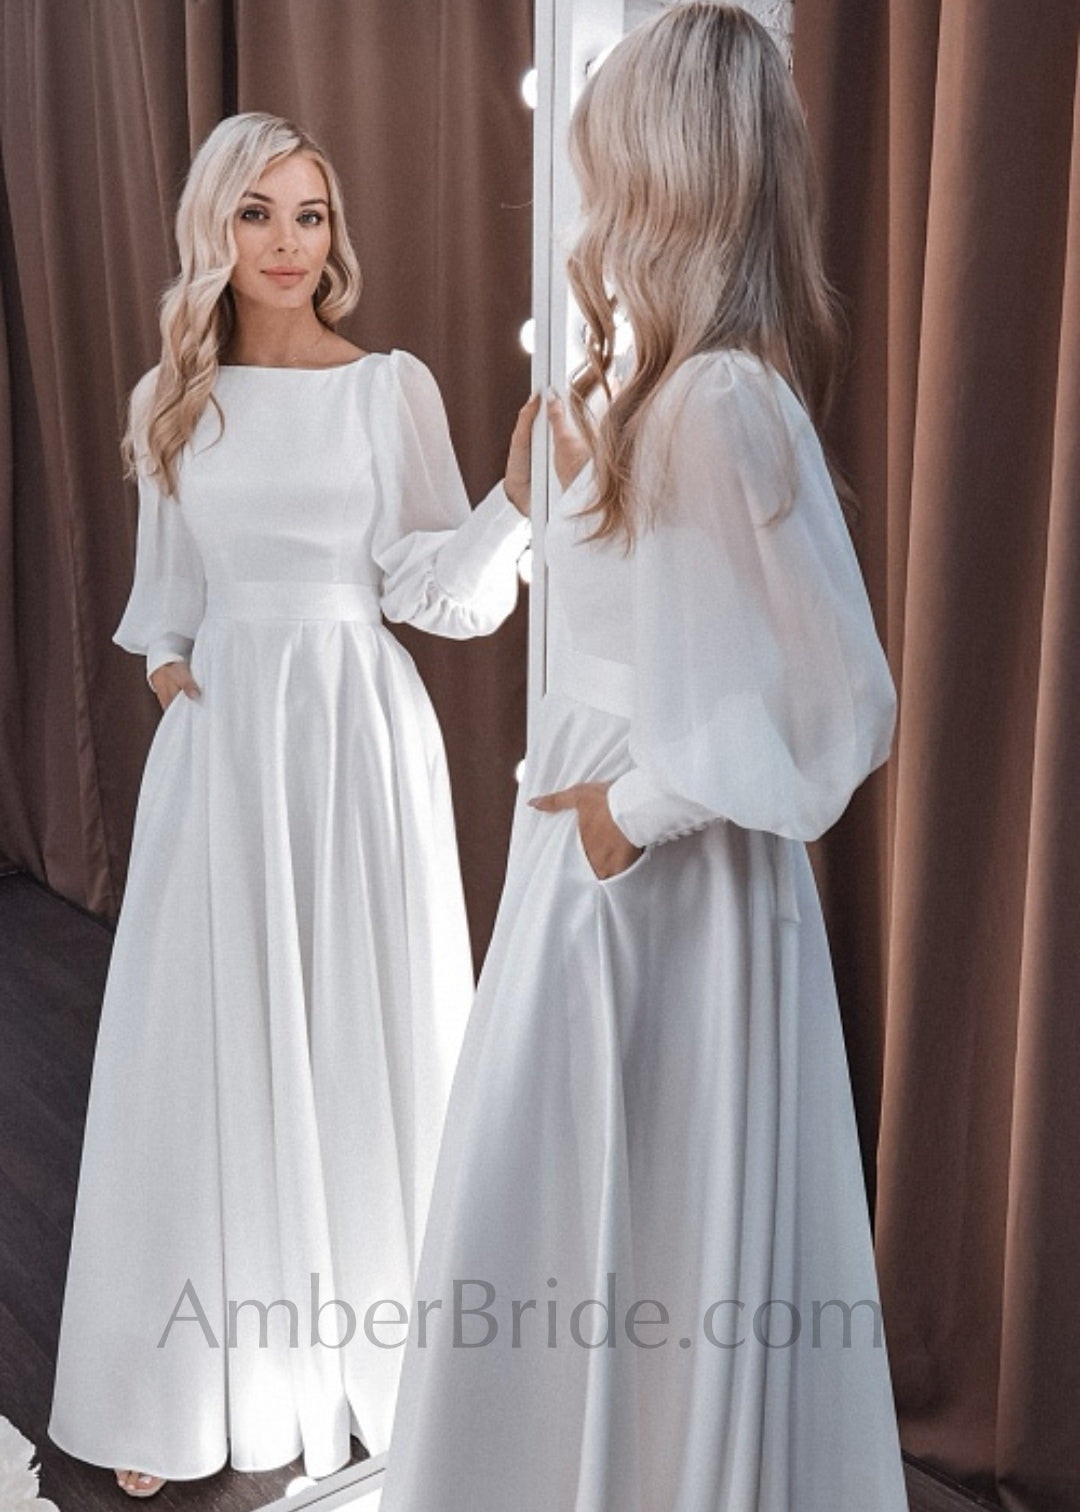 Minimalist A Line Satin Wedding Dress with Boat Neck and Bishop Sleeves